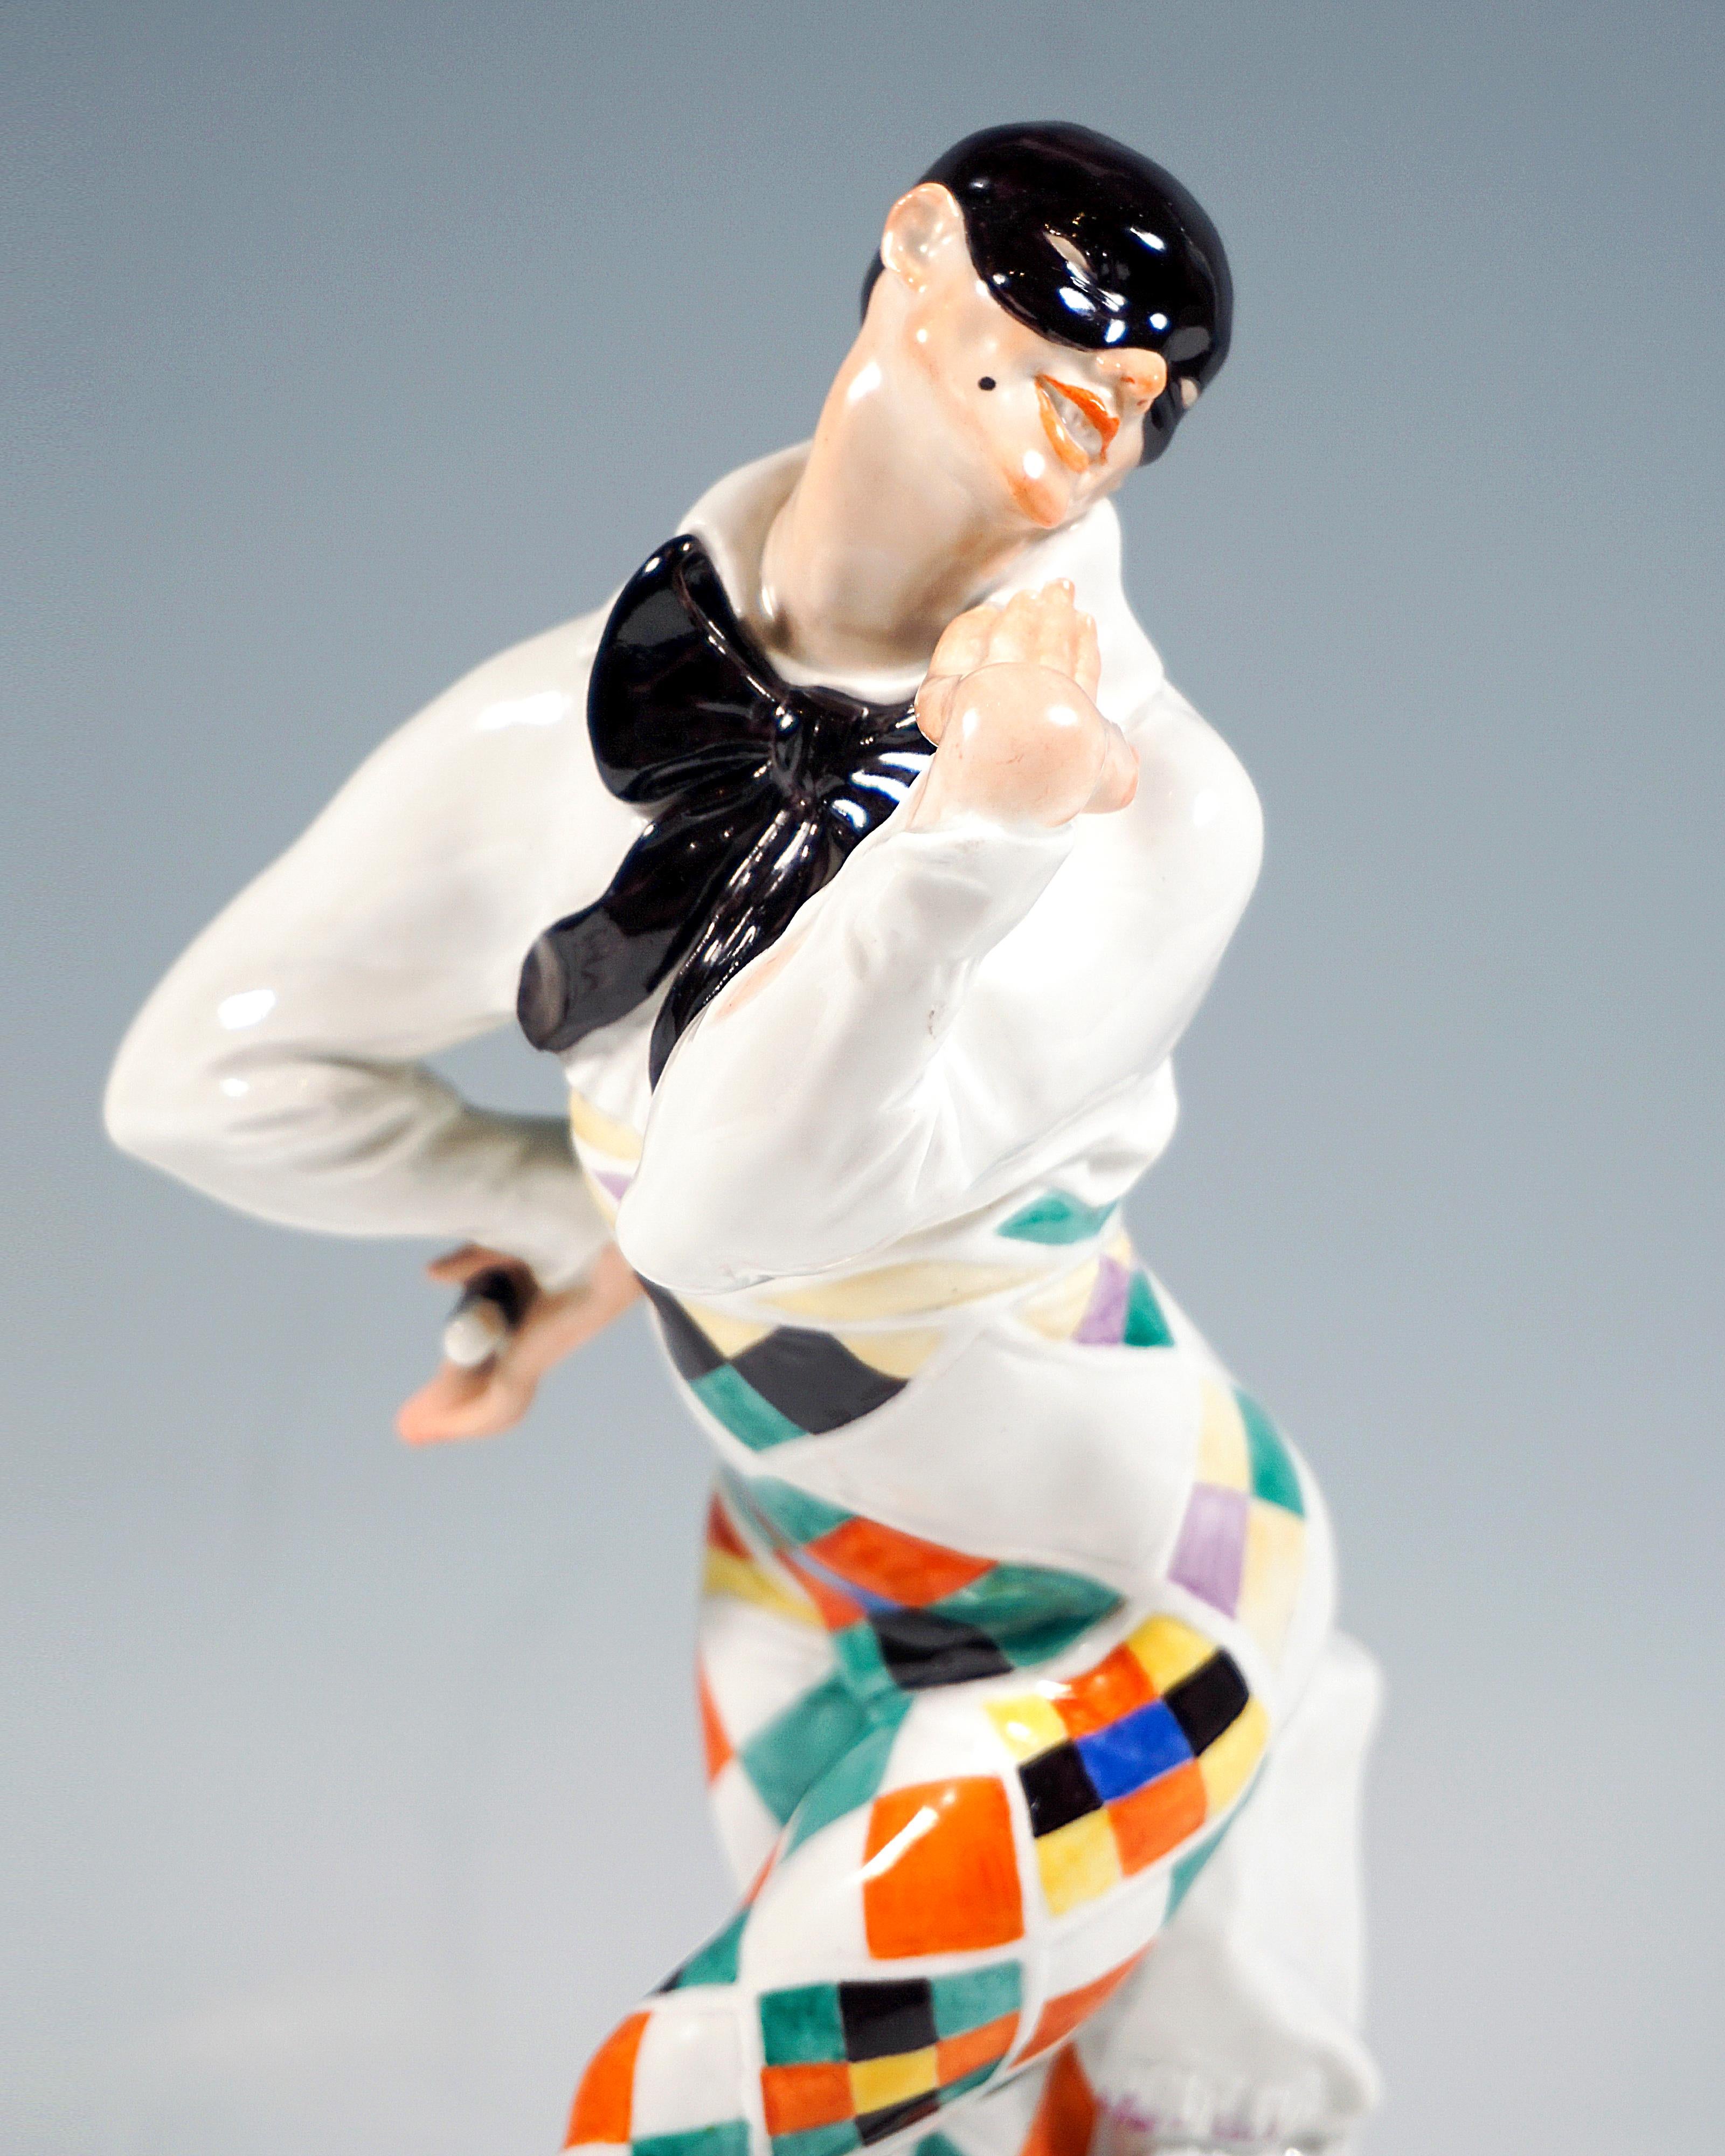 Meissen Figurine 'Bajazzo', Russian Ballet 'Carnival', by Paul Scheurich, 20th In Good Condition For Sale In Vienna, AT